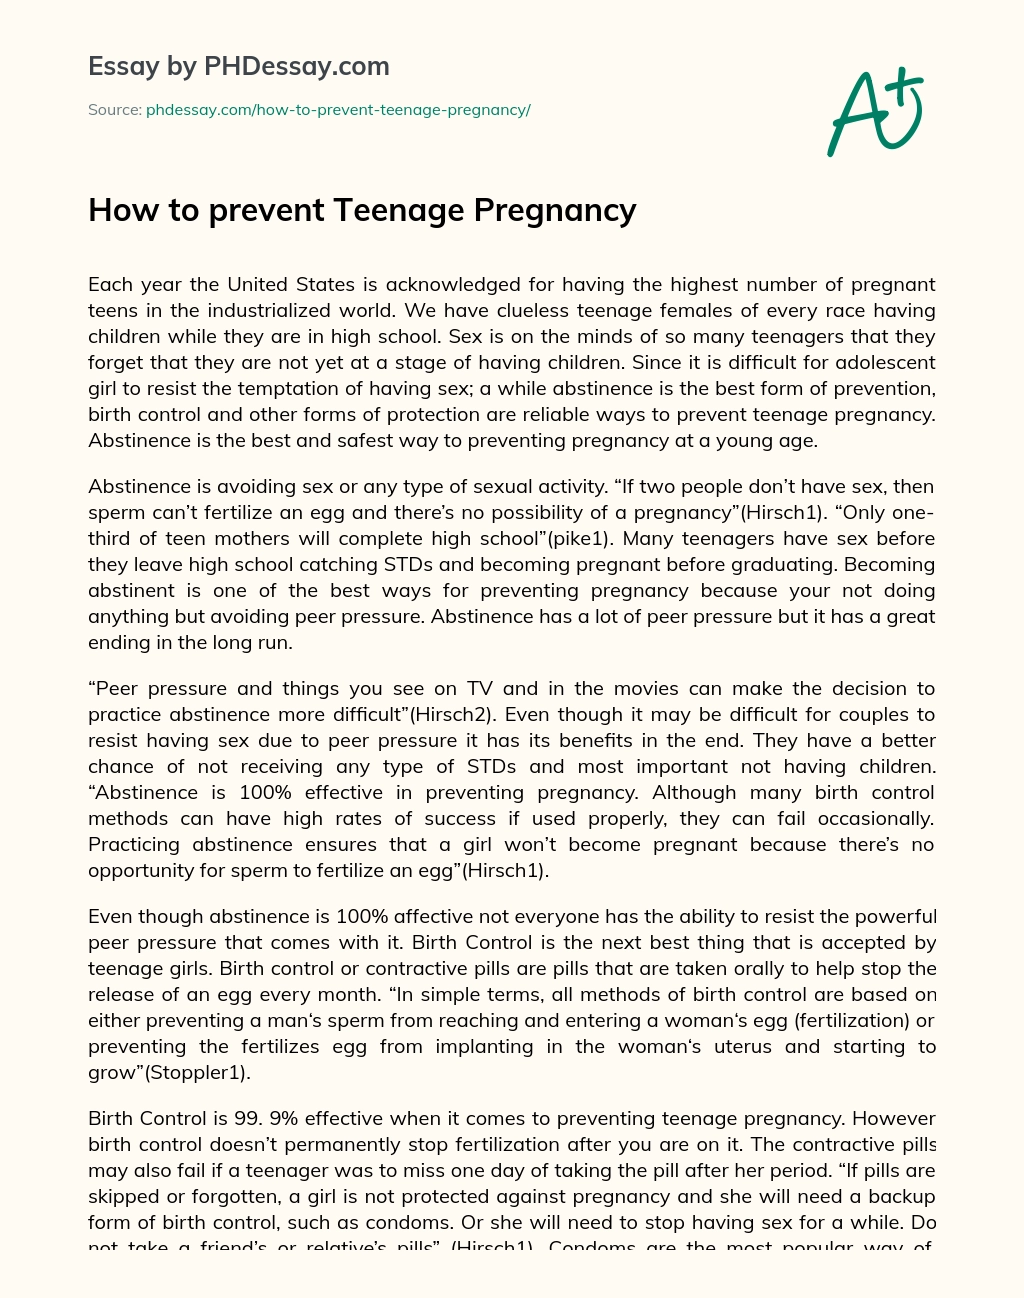 How to prevent Teenage Pregnancy essay